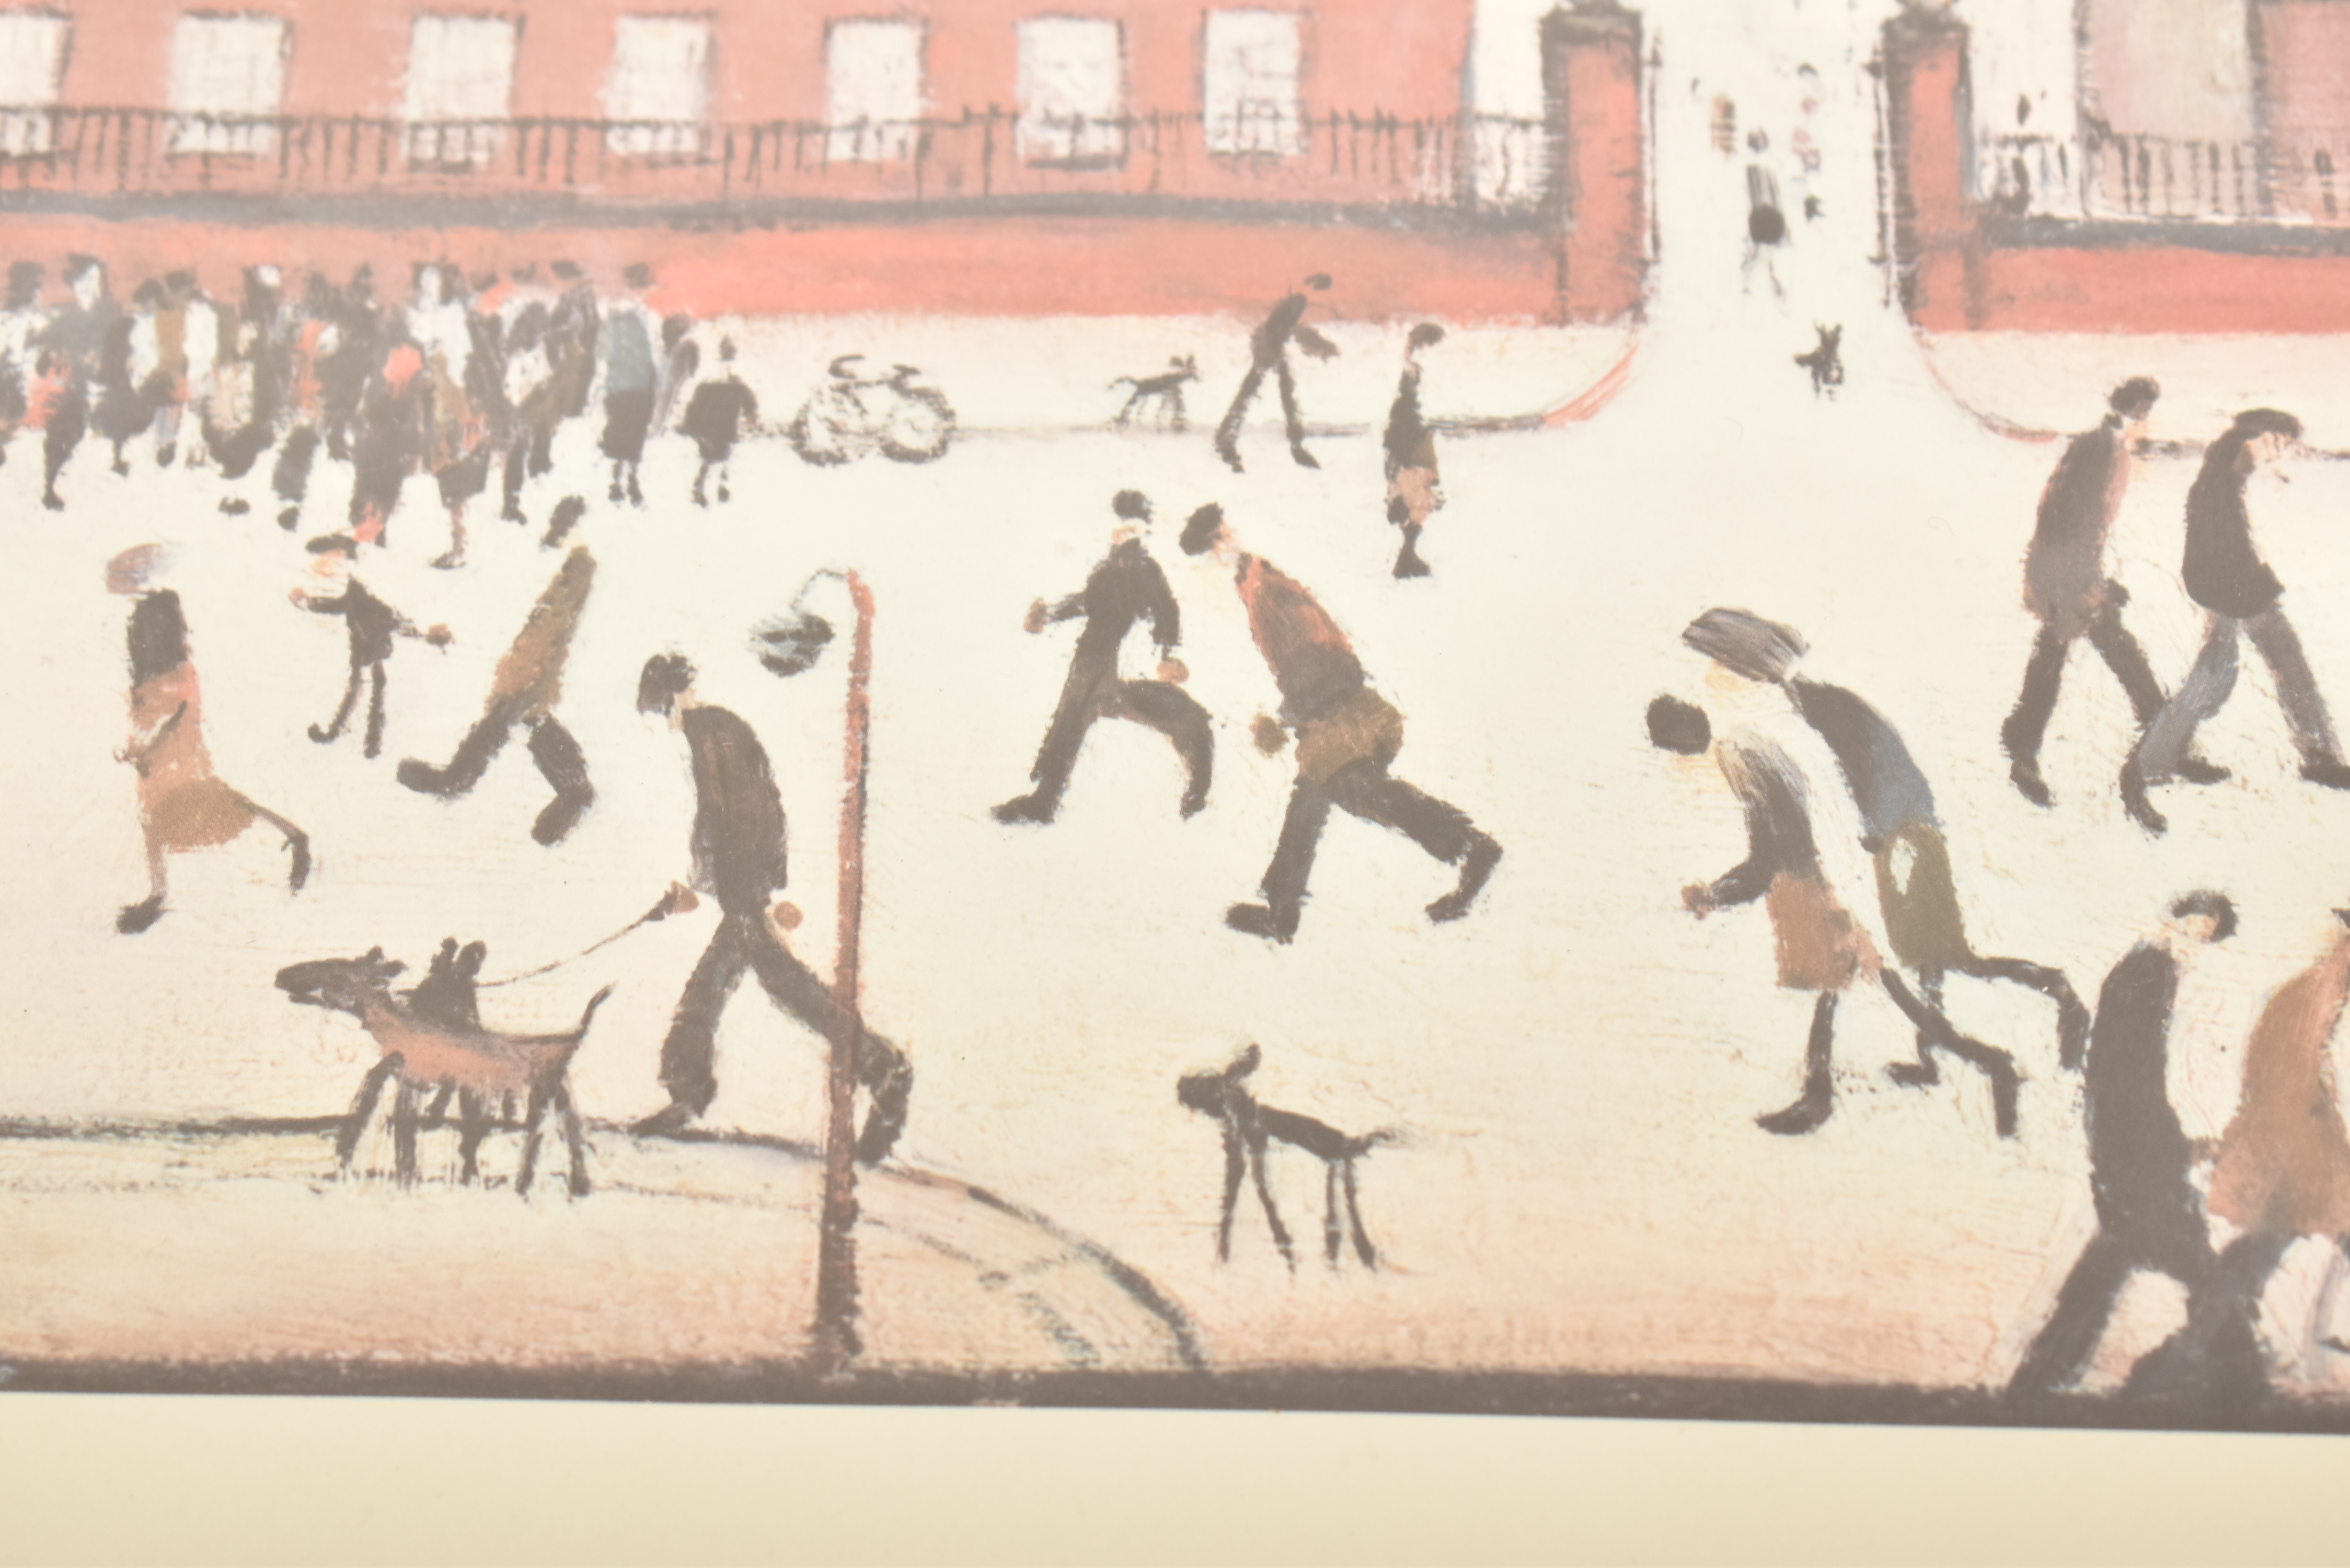 L S LOWRY - MILL SCENE - 1972 - SIGNED LIMITED EDITION PRINT - Image 3 of 6